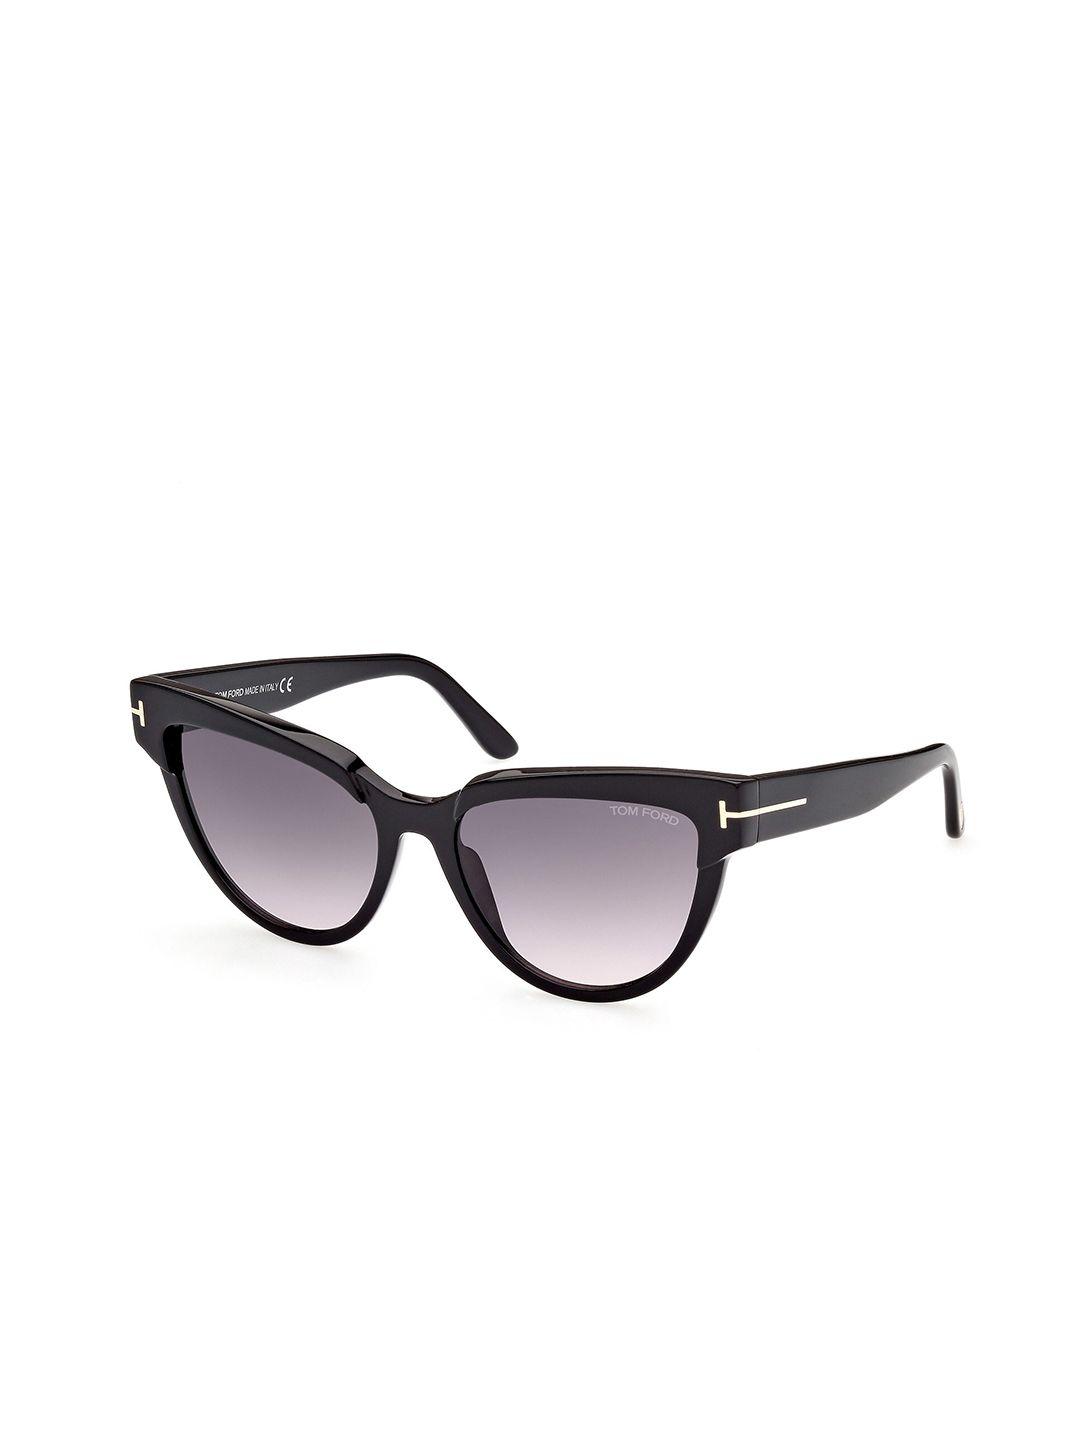 tom ford women cateye sunglasses with uv protected lens